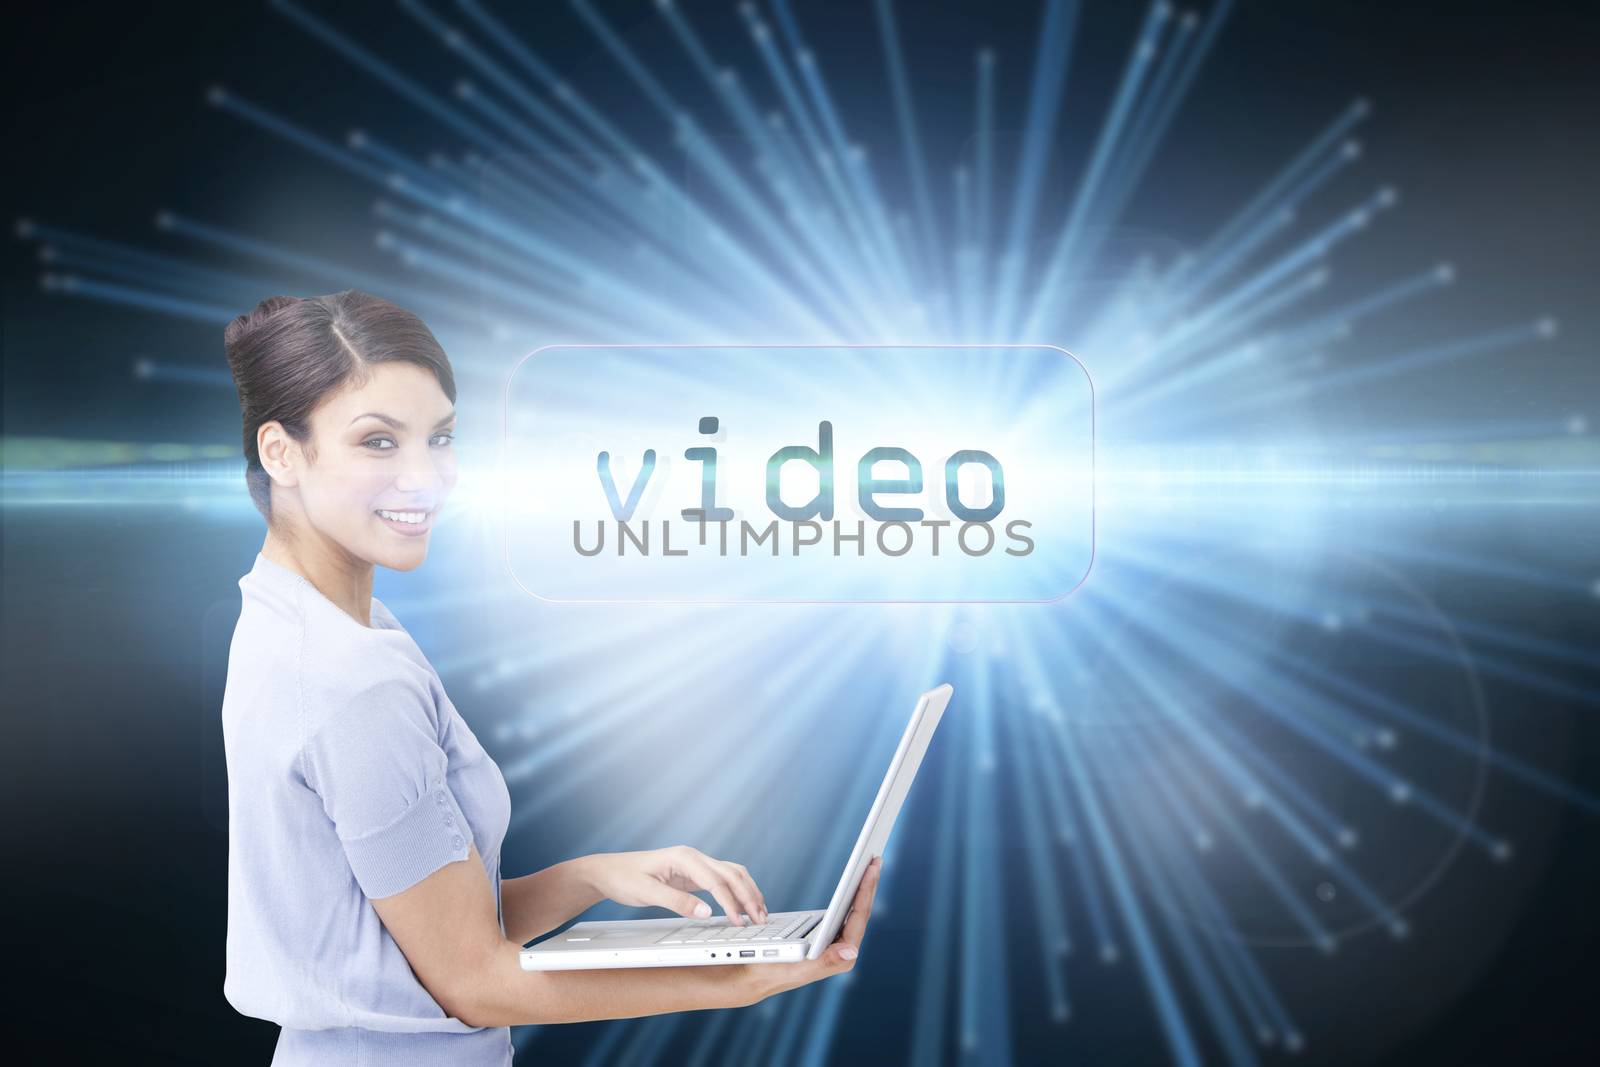 The word video and cheerful businesswoman using a laptop against abstract technology background